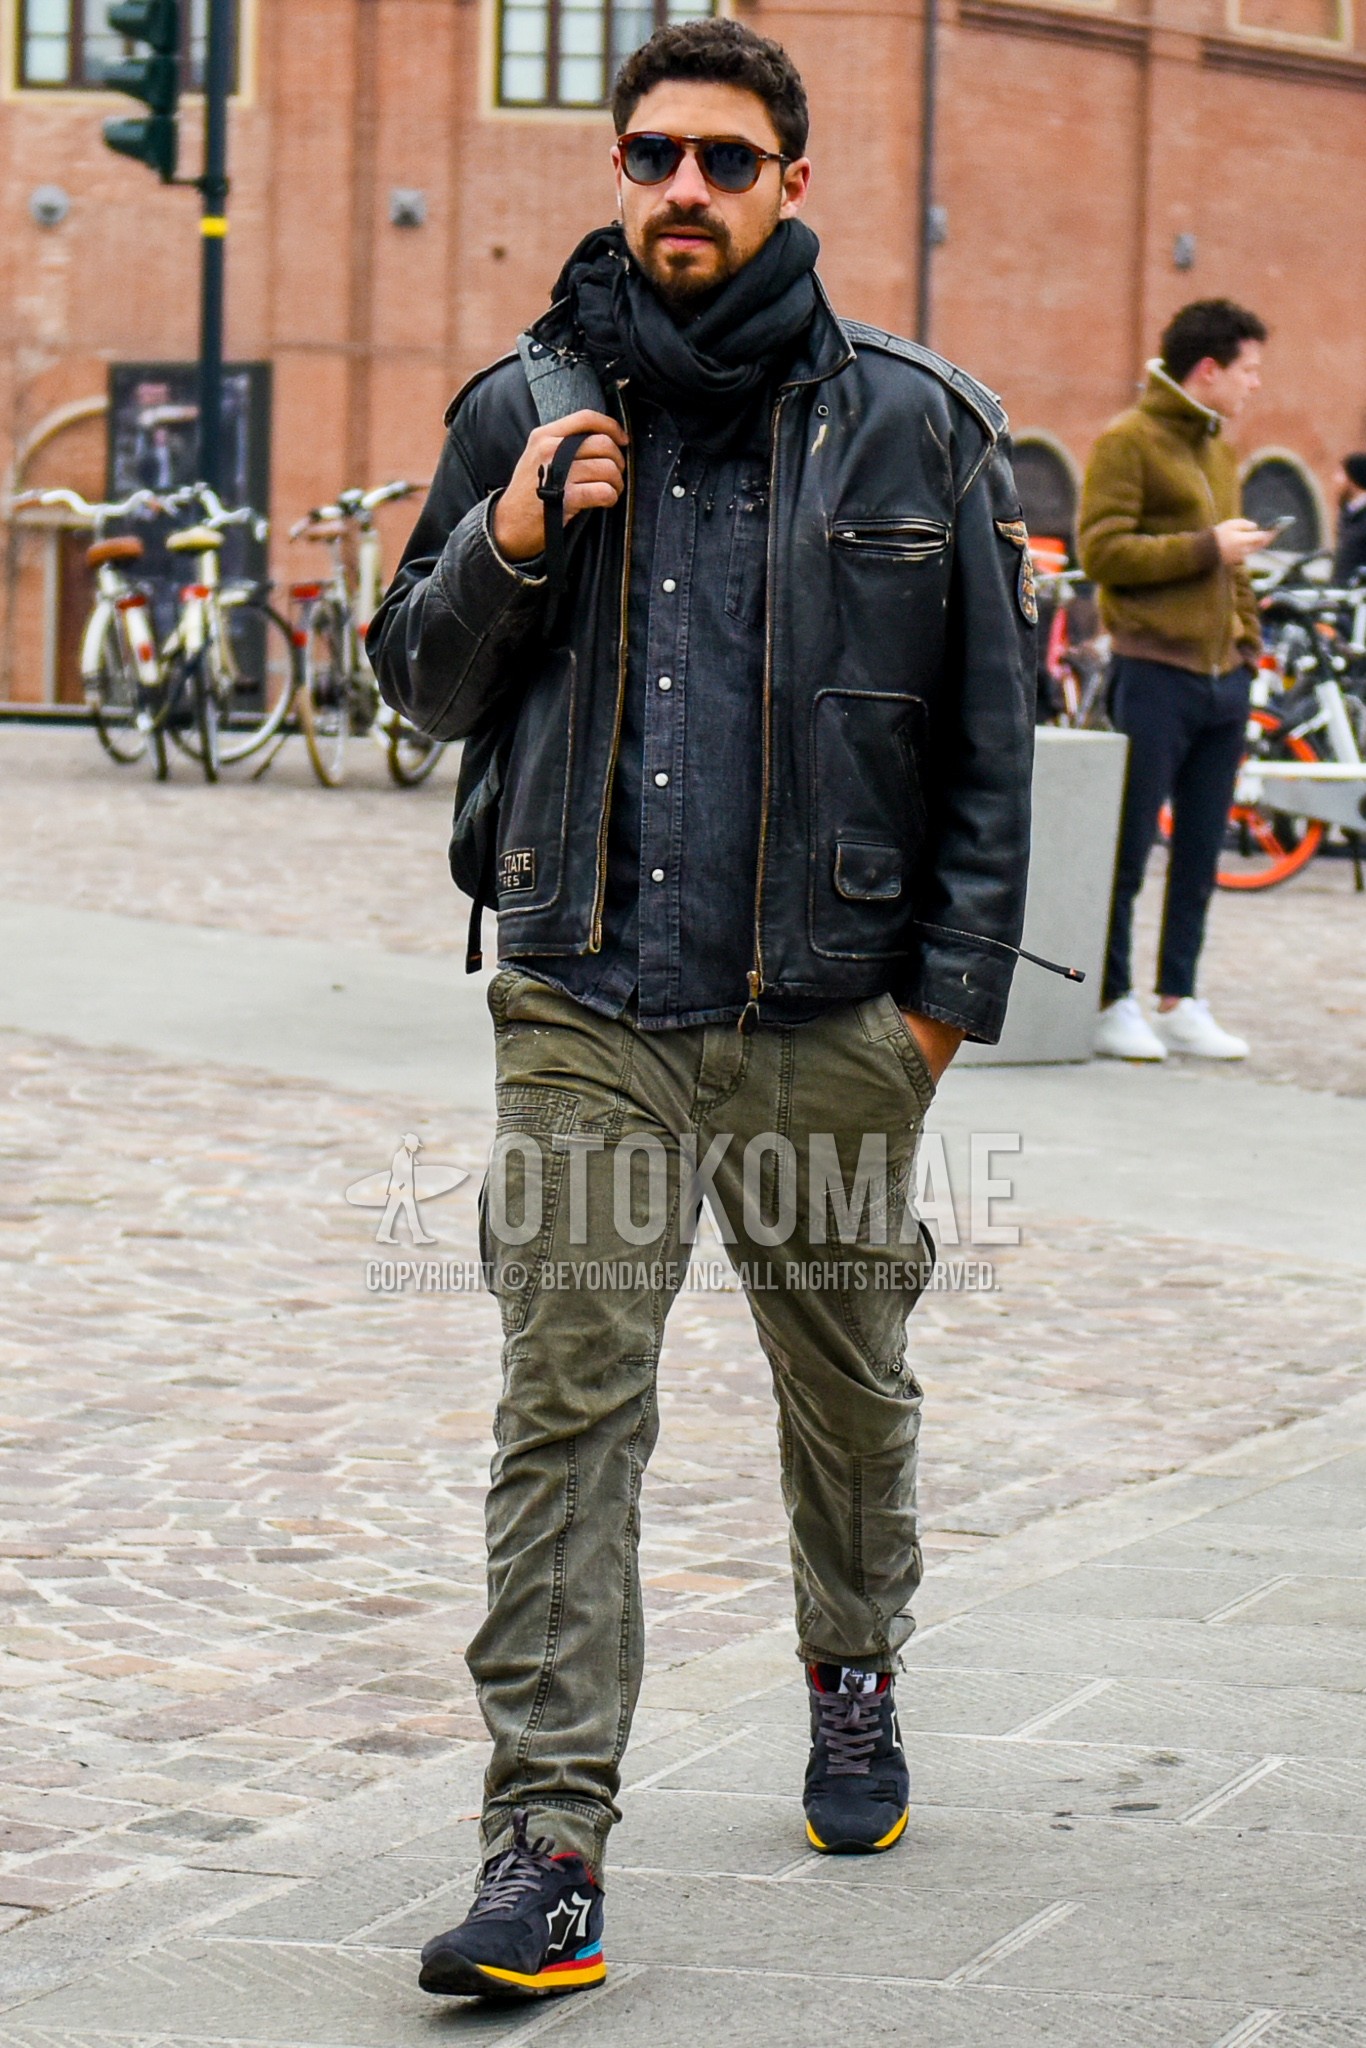 Men's winter outfit with plain sunglasses, black plain scarf, black plain leather jacket, black plain denim shirt/chambray shirt, olive green plain cargo pants, dark gray low-cut sneakers.